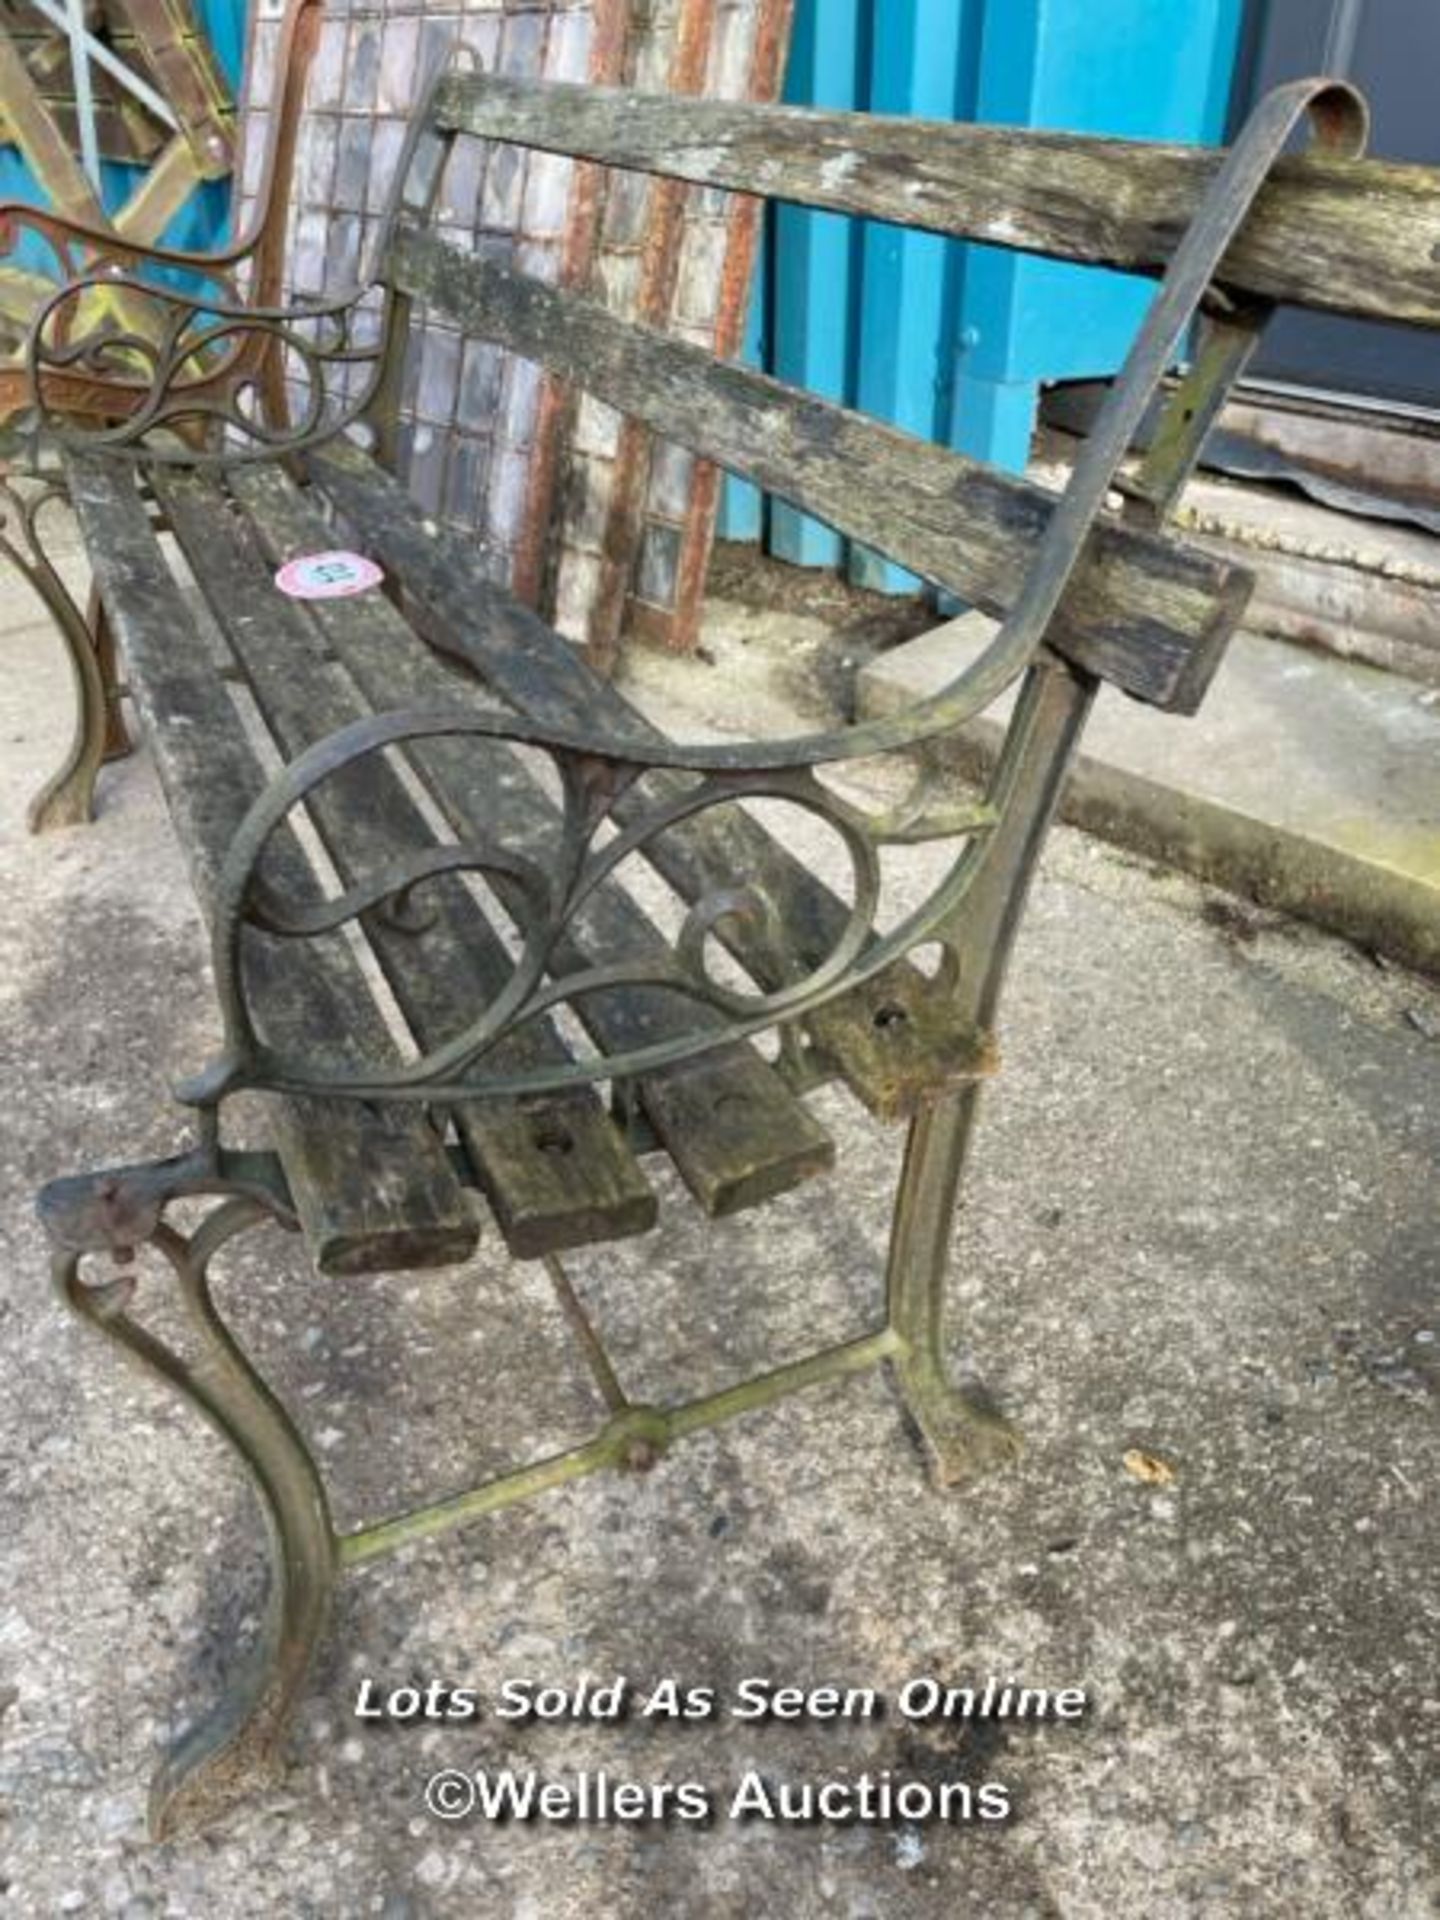 TWO GARDEN BENCHES WITH CAST IRON ENDS, IN NEED OF RESTORATION - Image 4 of 5